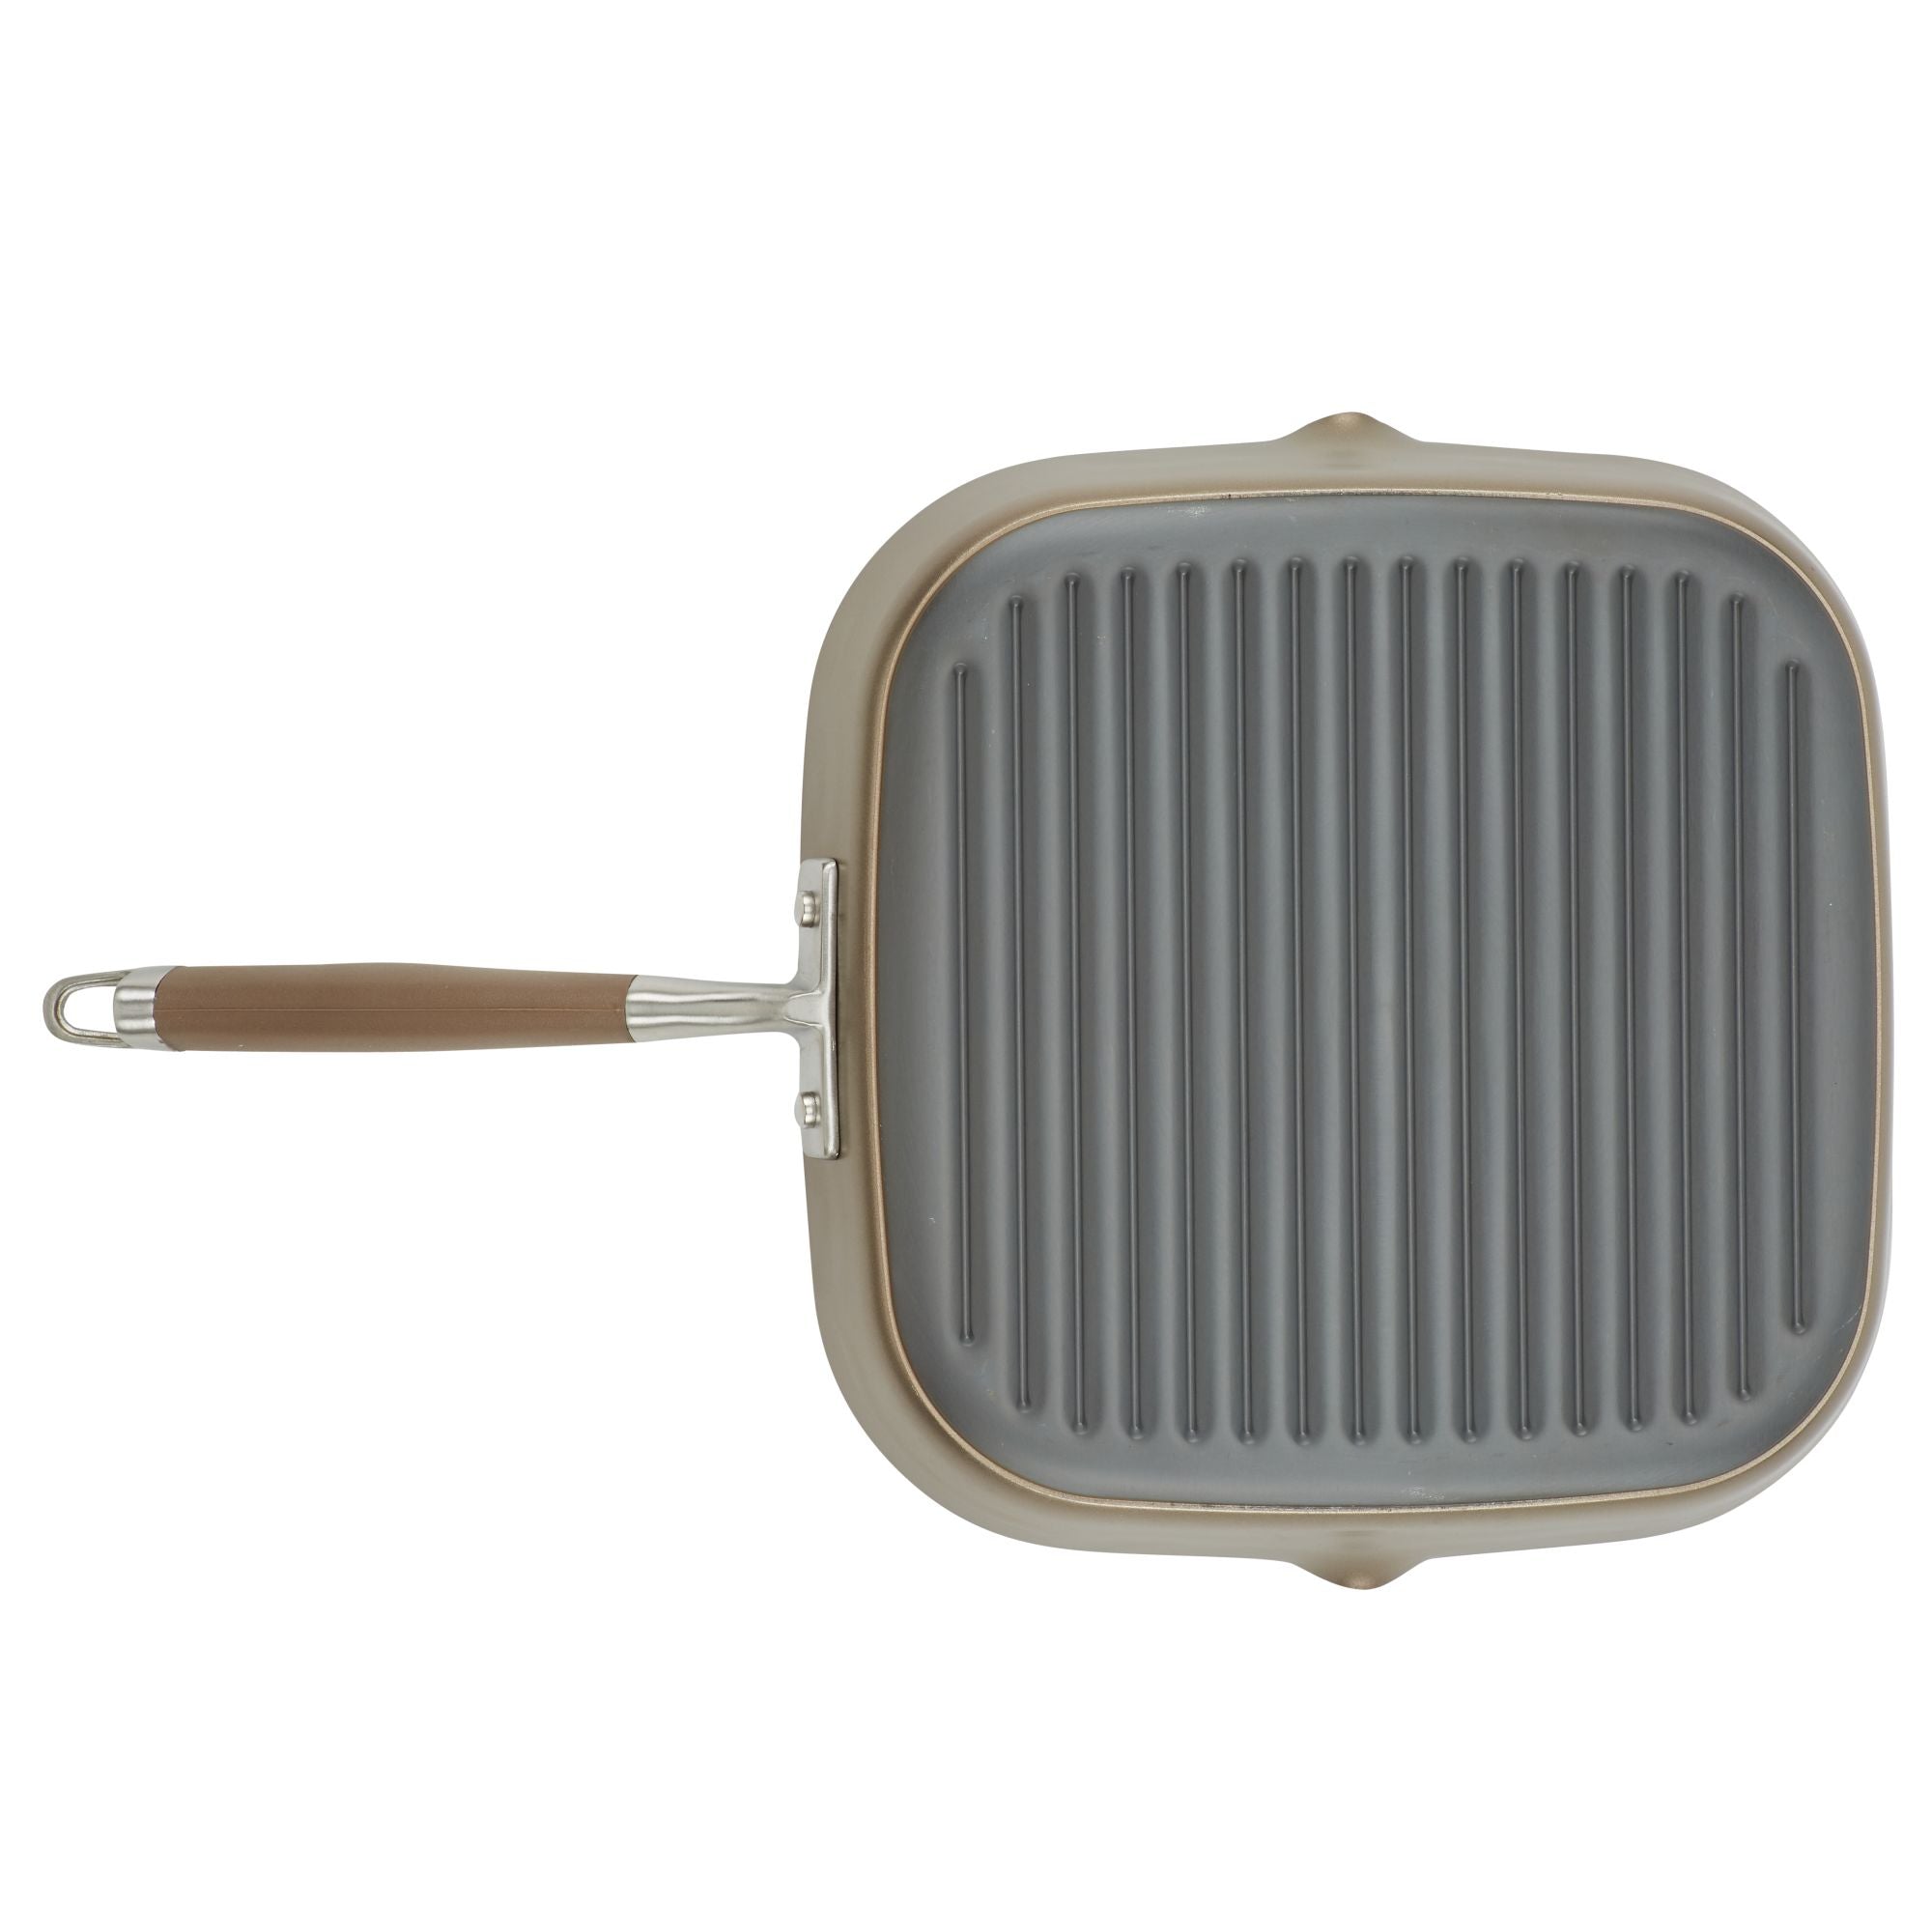 Advanced Home 11-Inch Deep Square Grill Pan